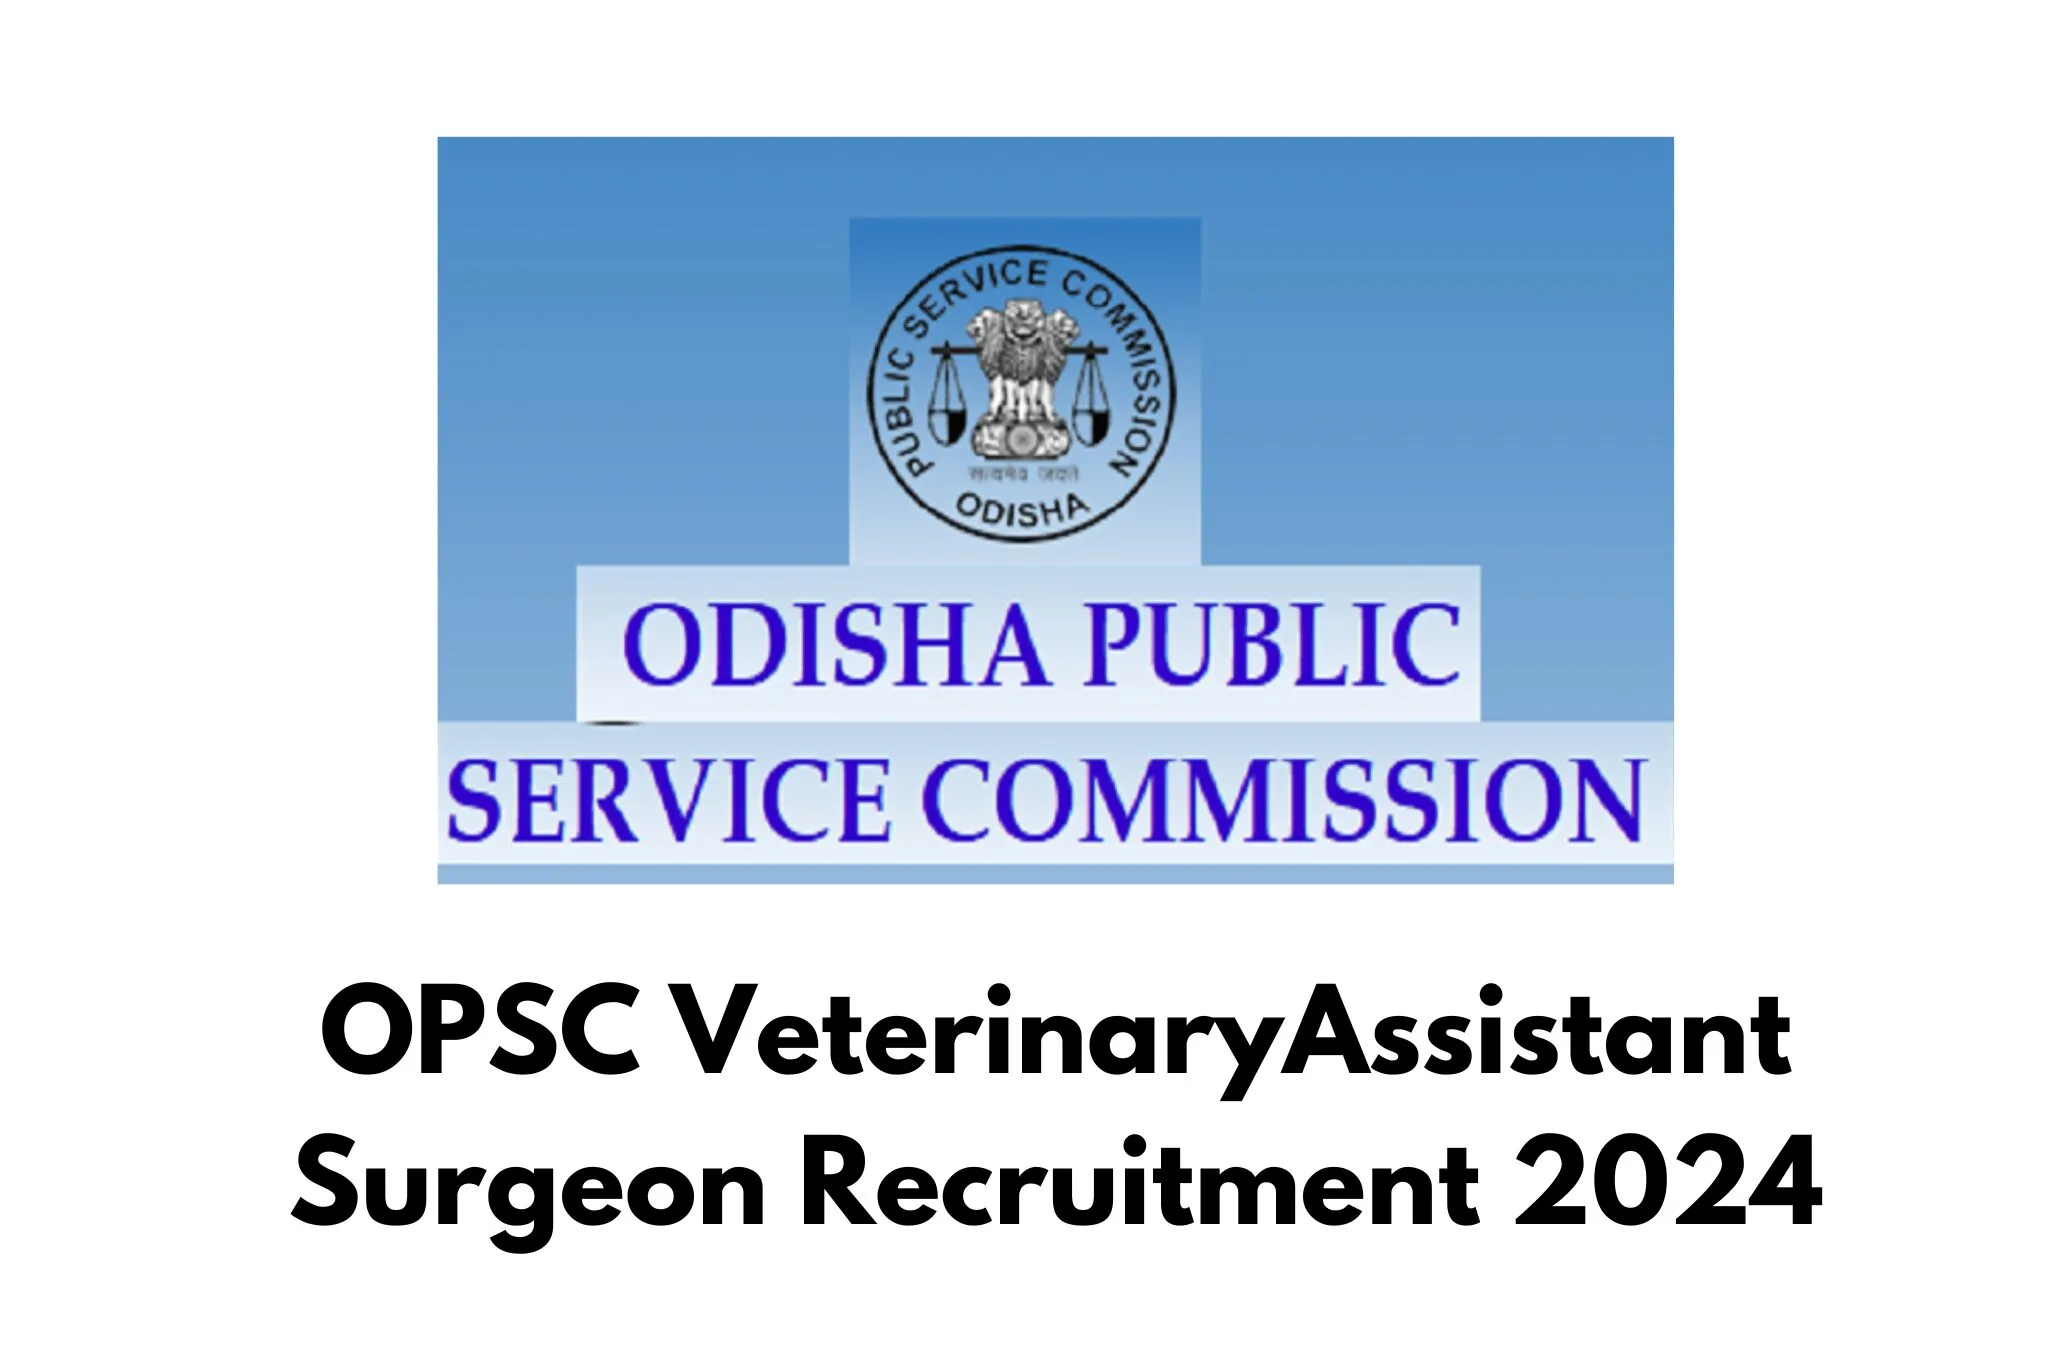 OPSC Veterinary Assistant Surgeon Recruitment 2024